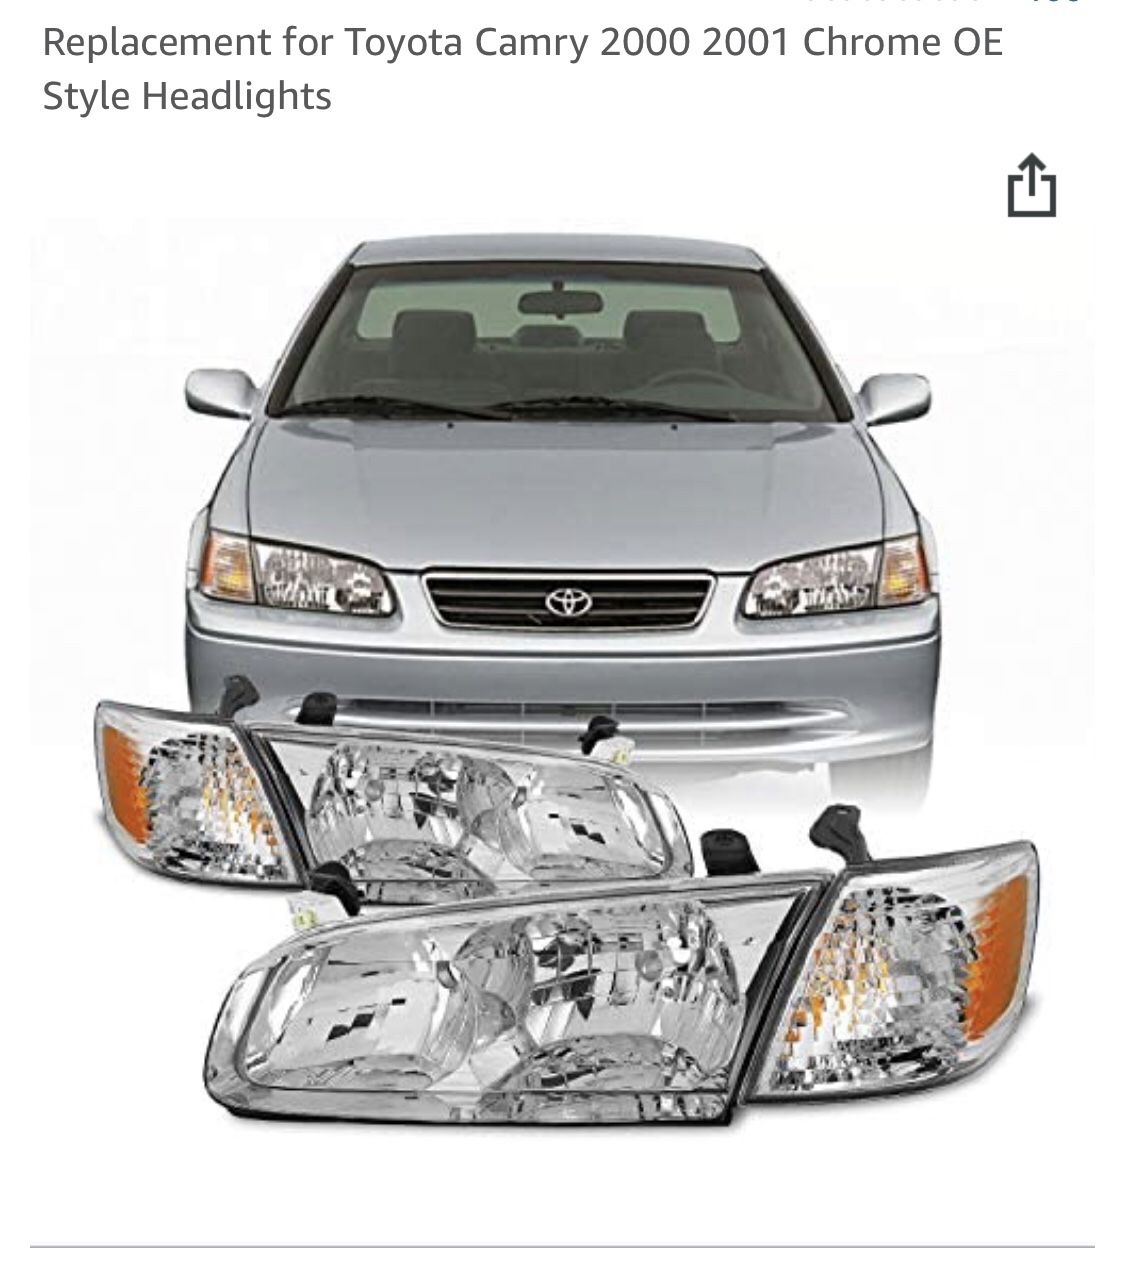 Toyota Camry OE Chrome Housing Headlights Replacement For 00-2001 Brand New In The Box 